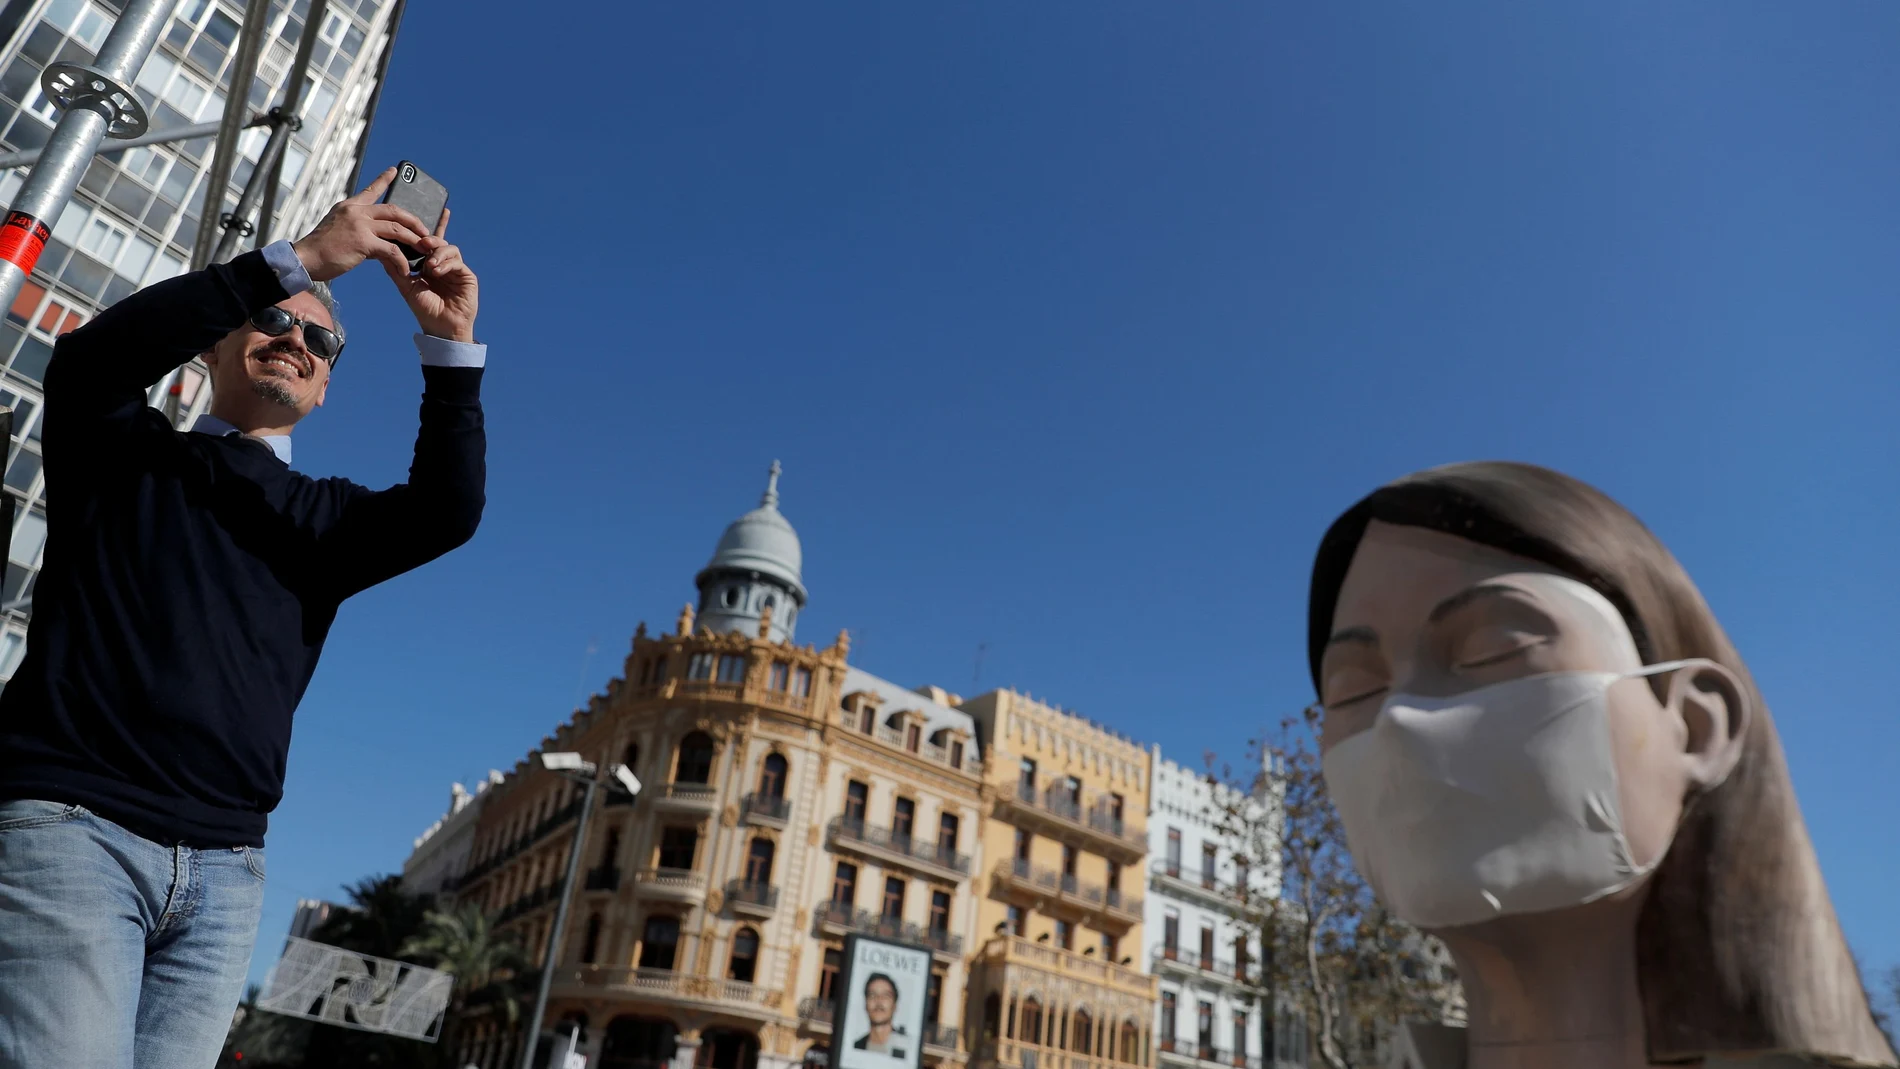 A man takes pictures next to a monument displayed with a protective mask, after regional authorities postponed the Fallas Festival amidst coronavirus concerns in Valencia